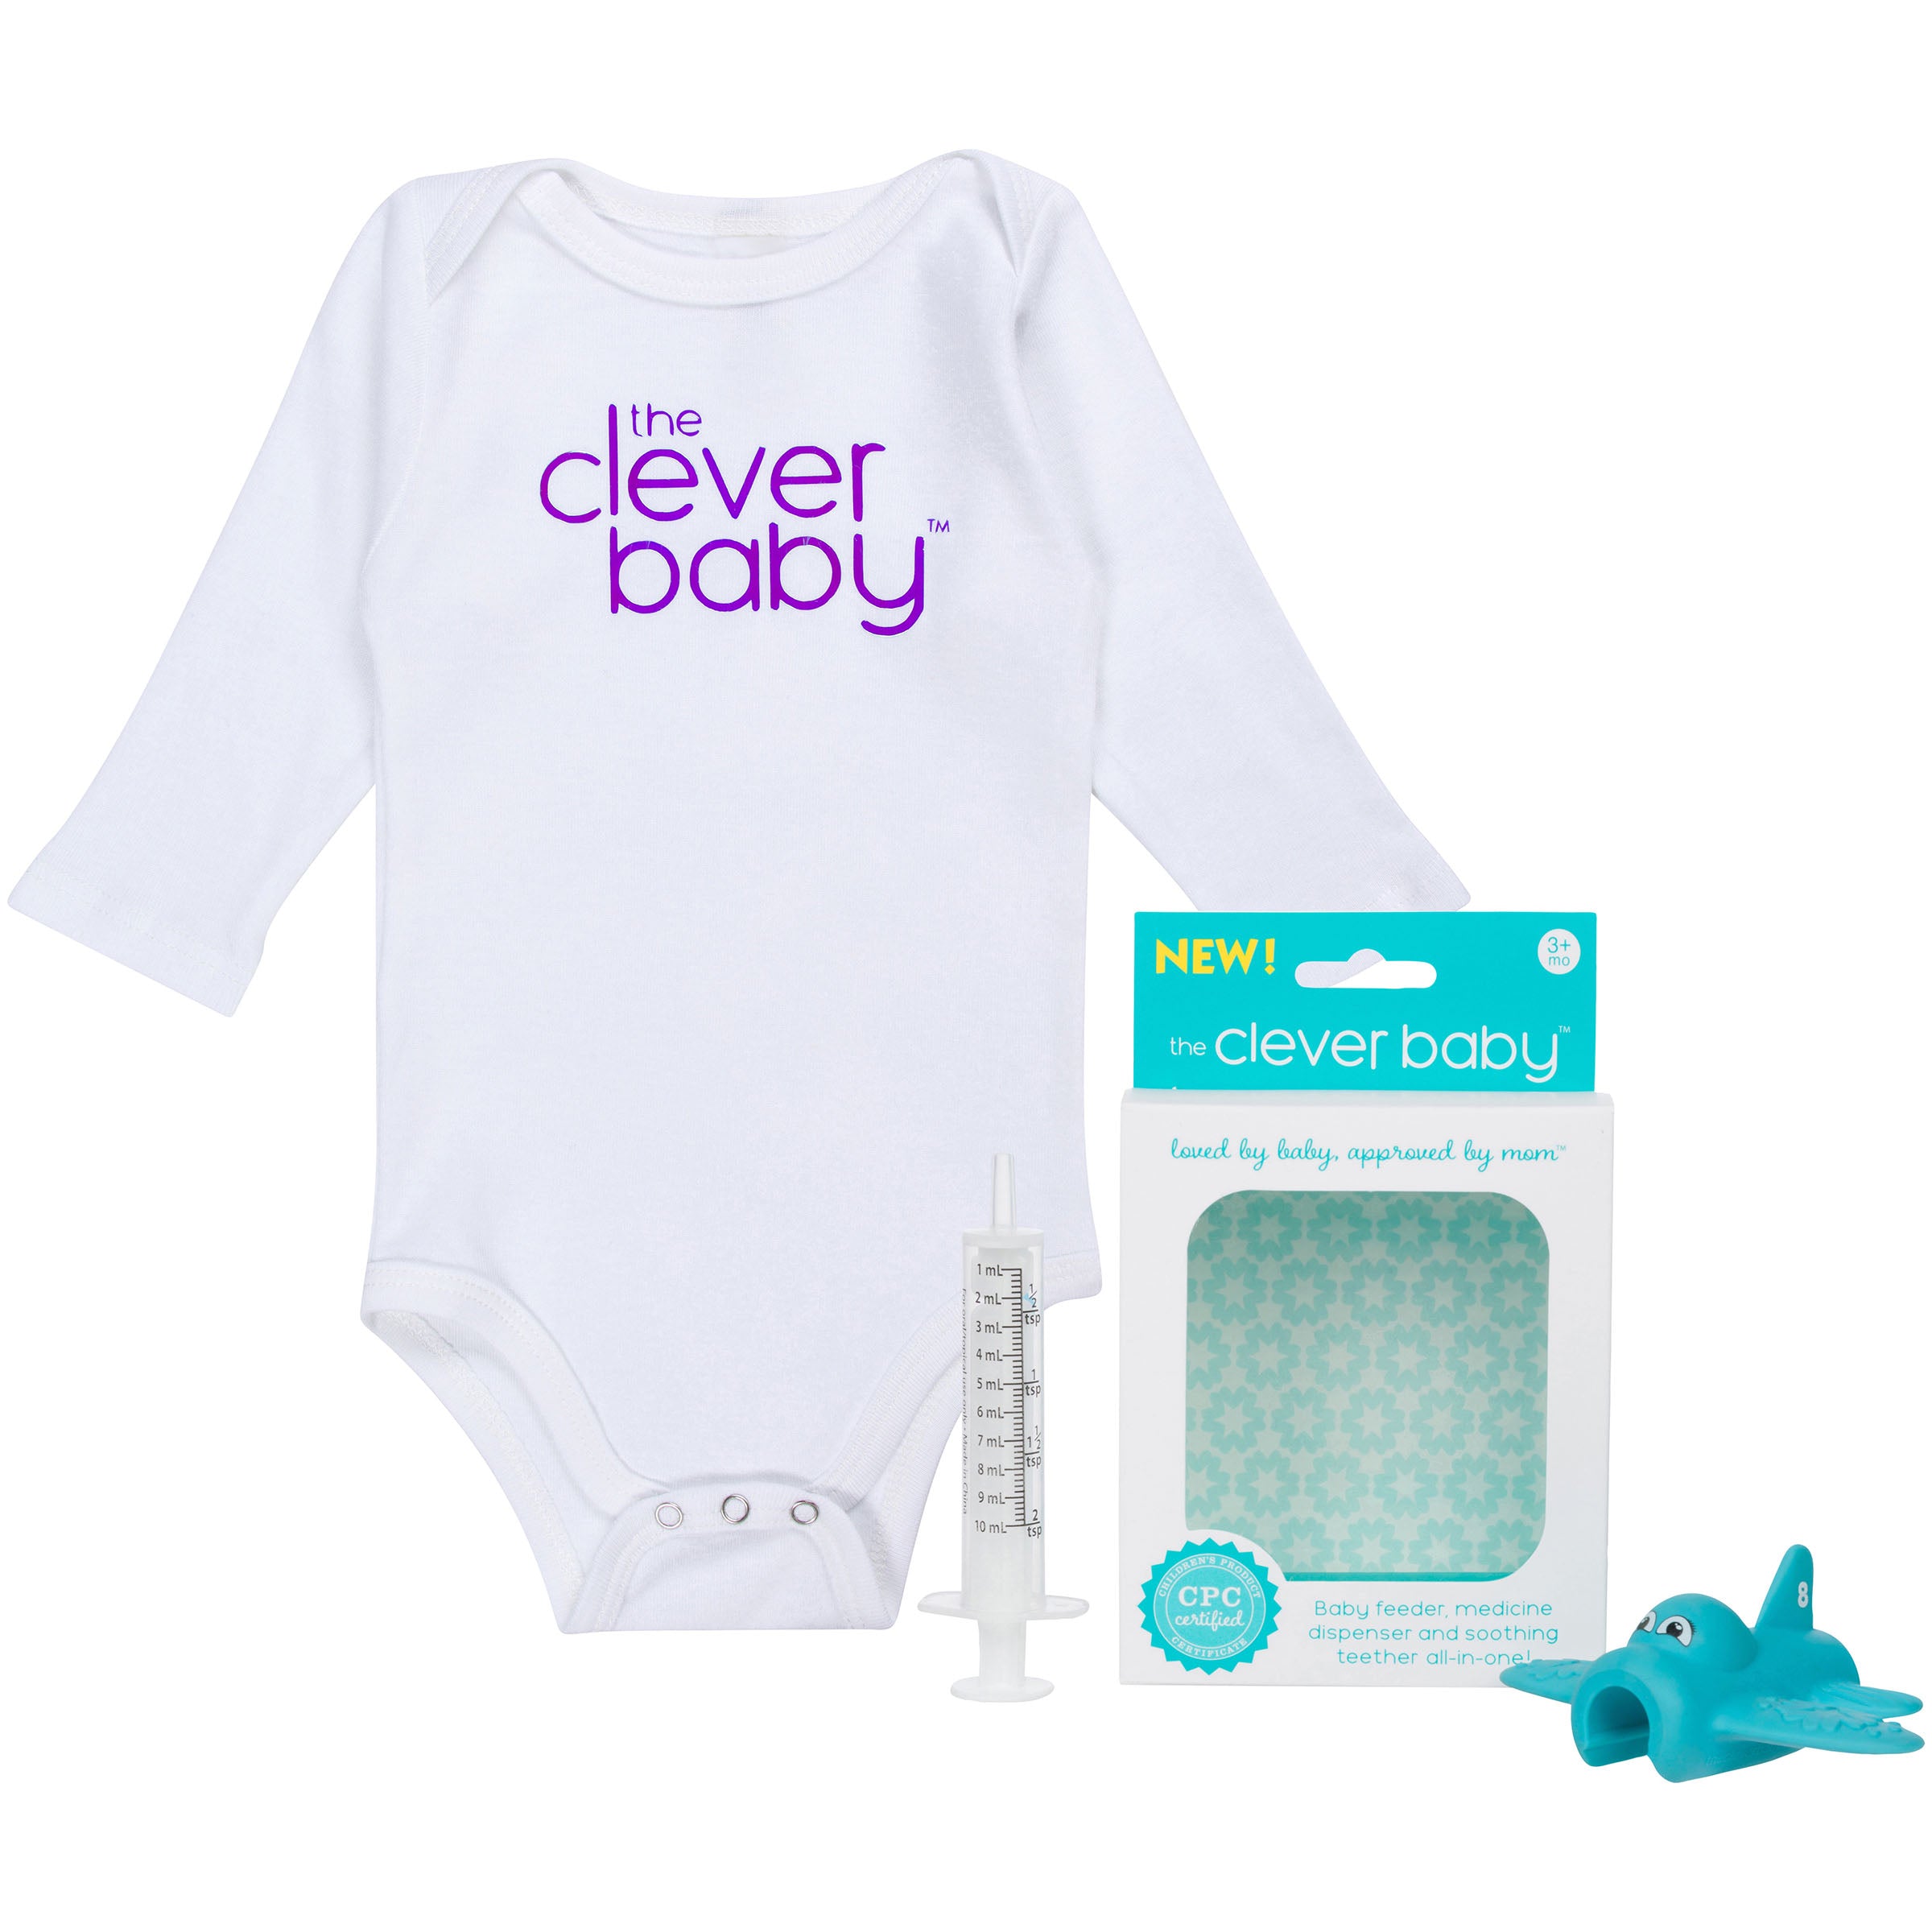 White onesie with logo and Jet gift bundle